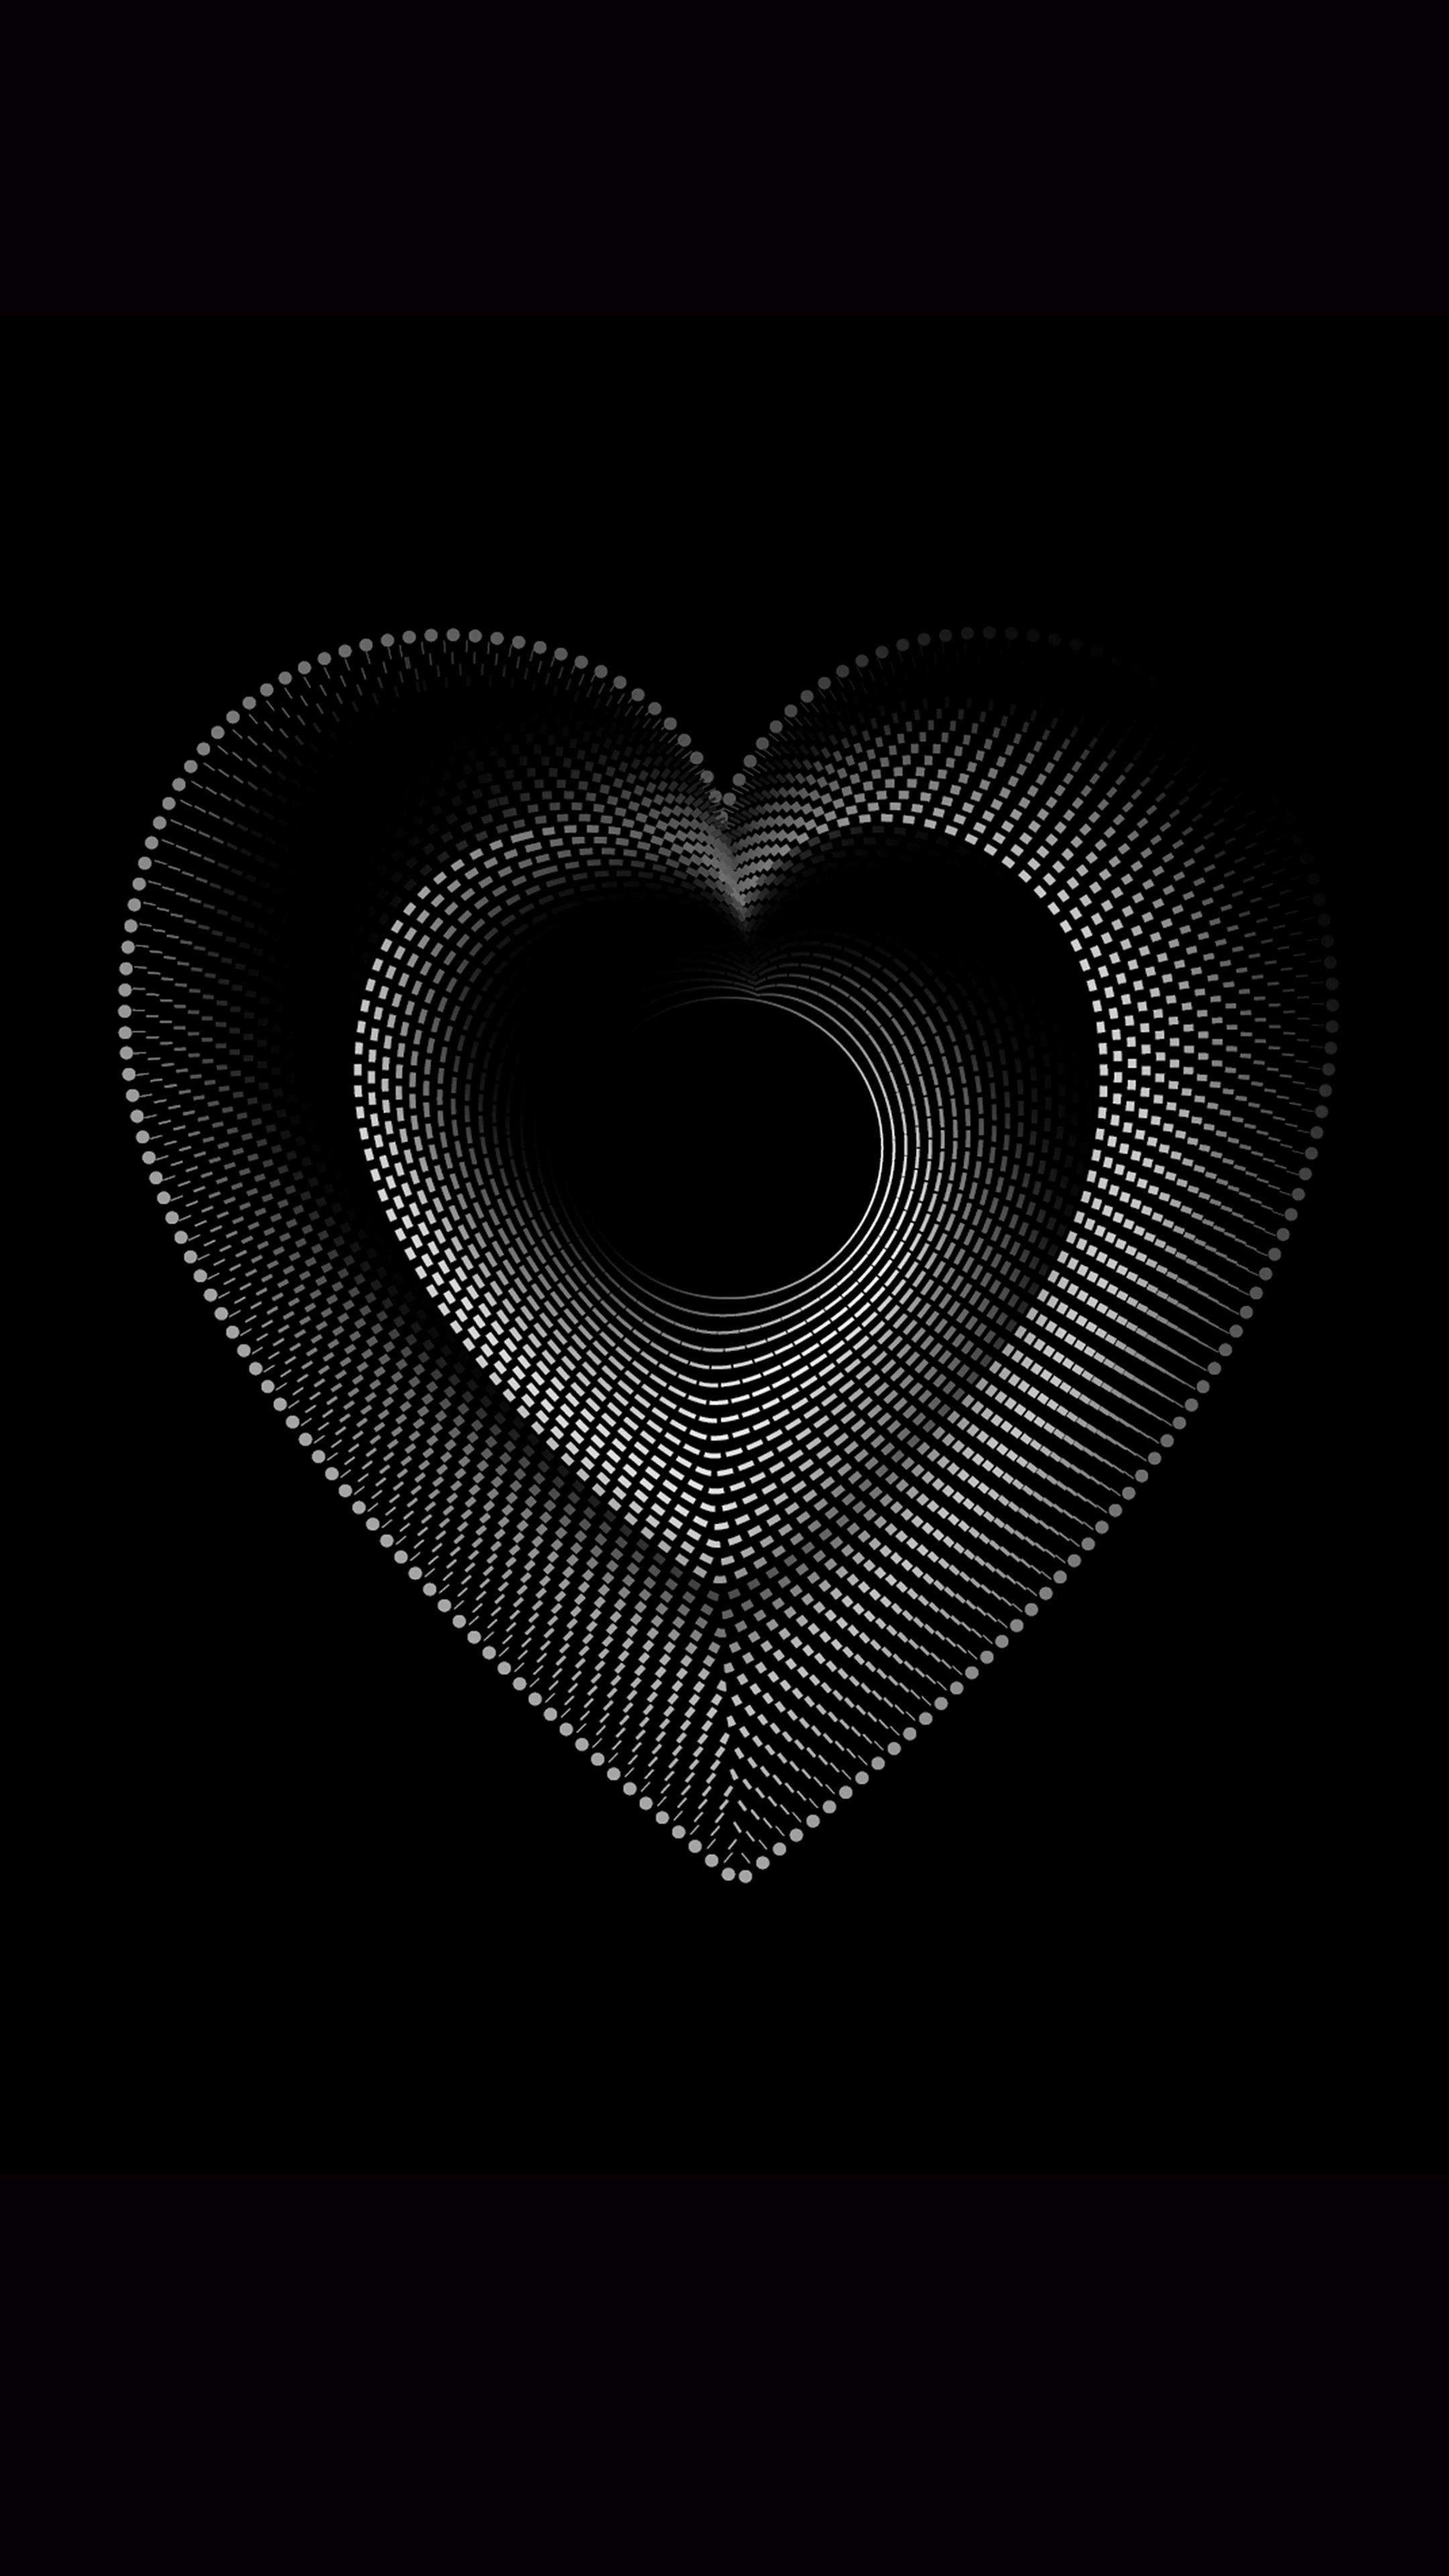 A 4K ultra HD mobile wallpaper with a minimalist abstract heart